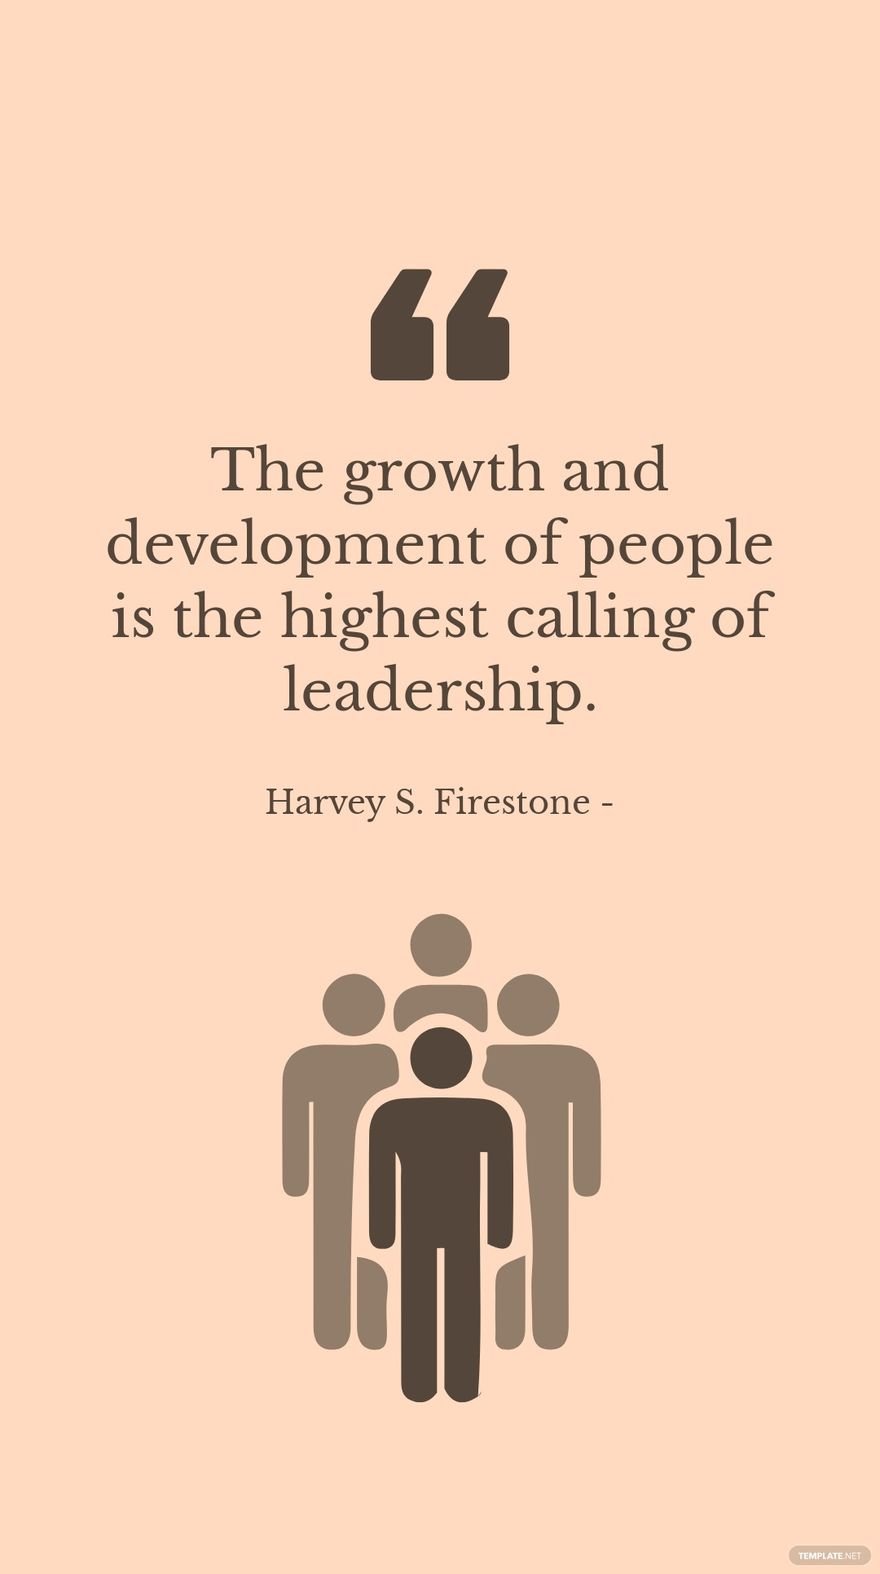 Free Harvey S. Firestone - The growth and development of people is the highest calling of leadership. in JPG